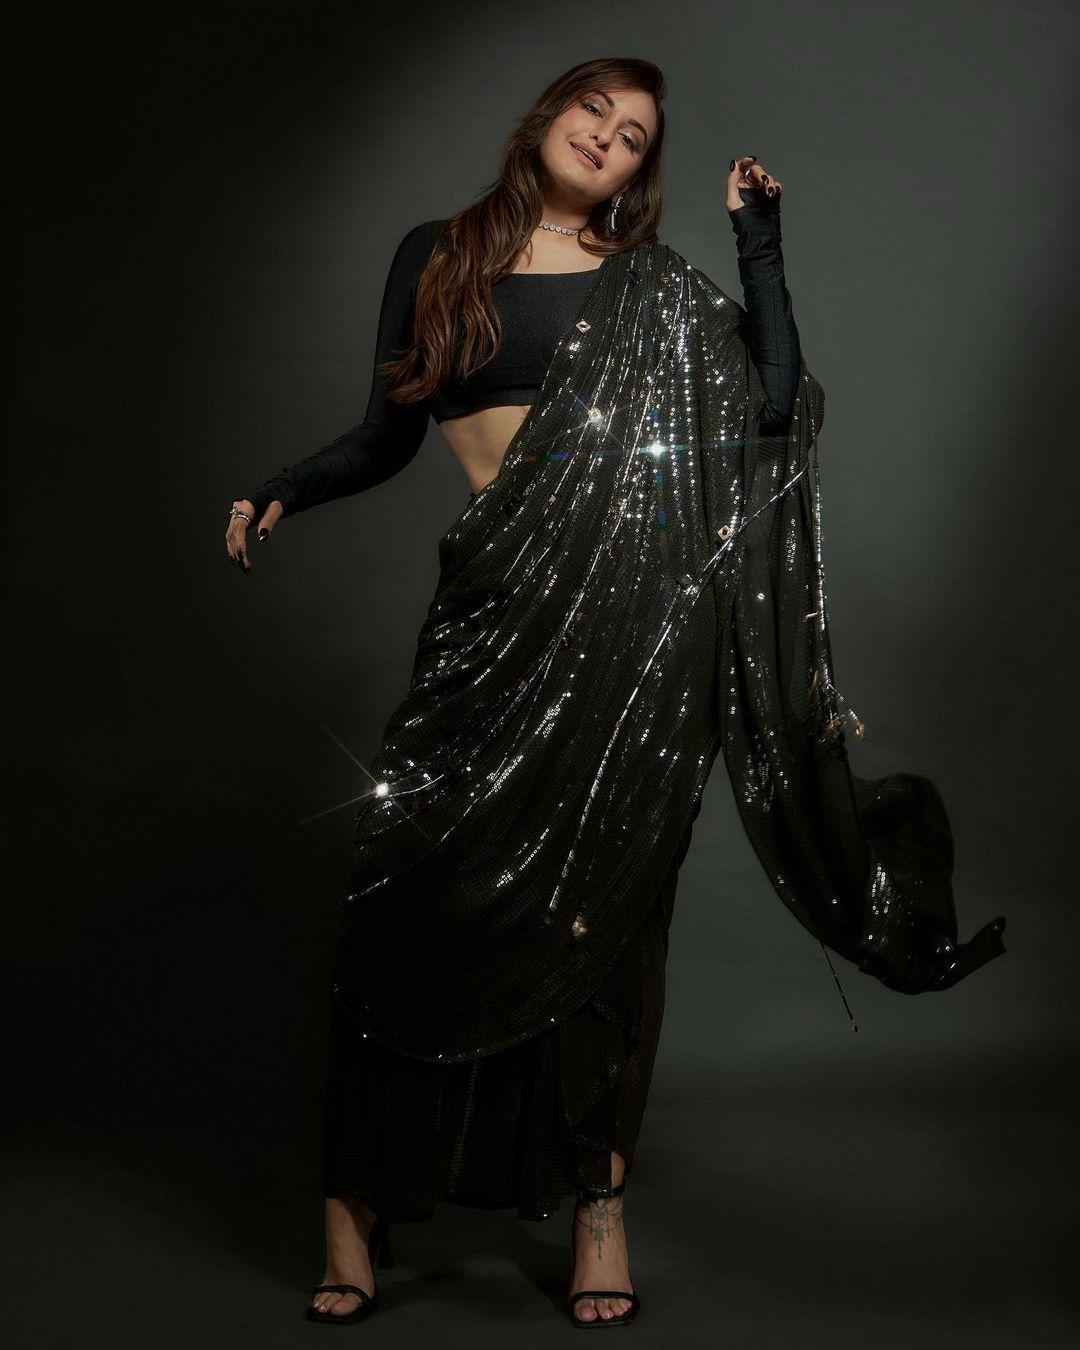 One can never go wrong with black, and Sonakshi has proved it right with this appearance. The actress paired a shiny black saree with a matching full-sleeved blouse